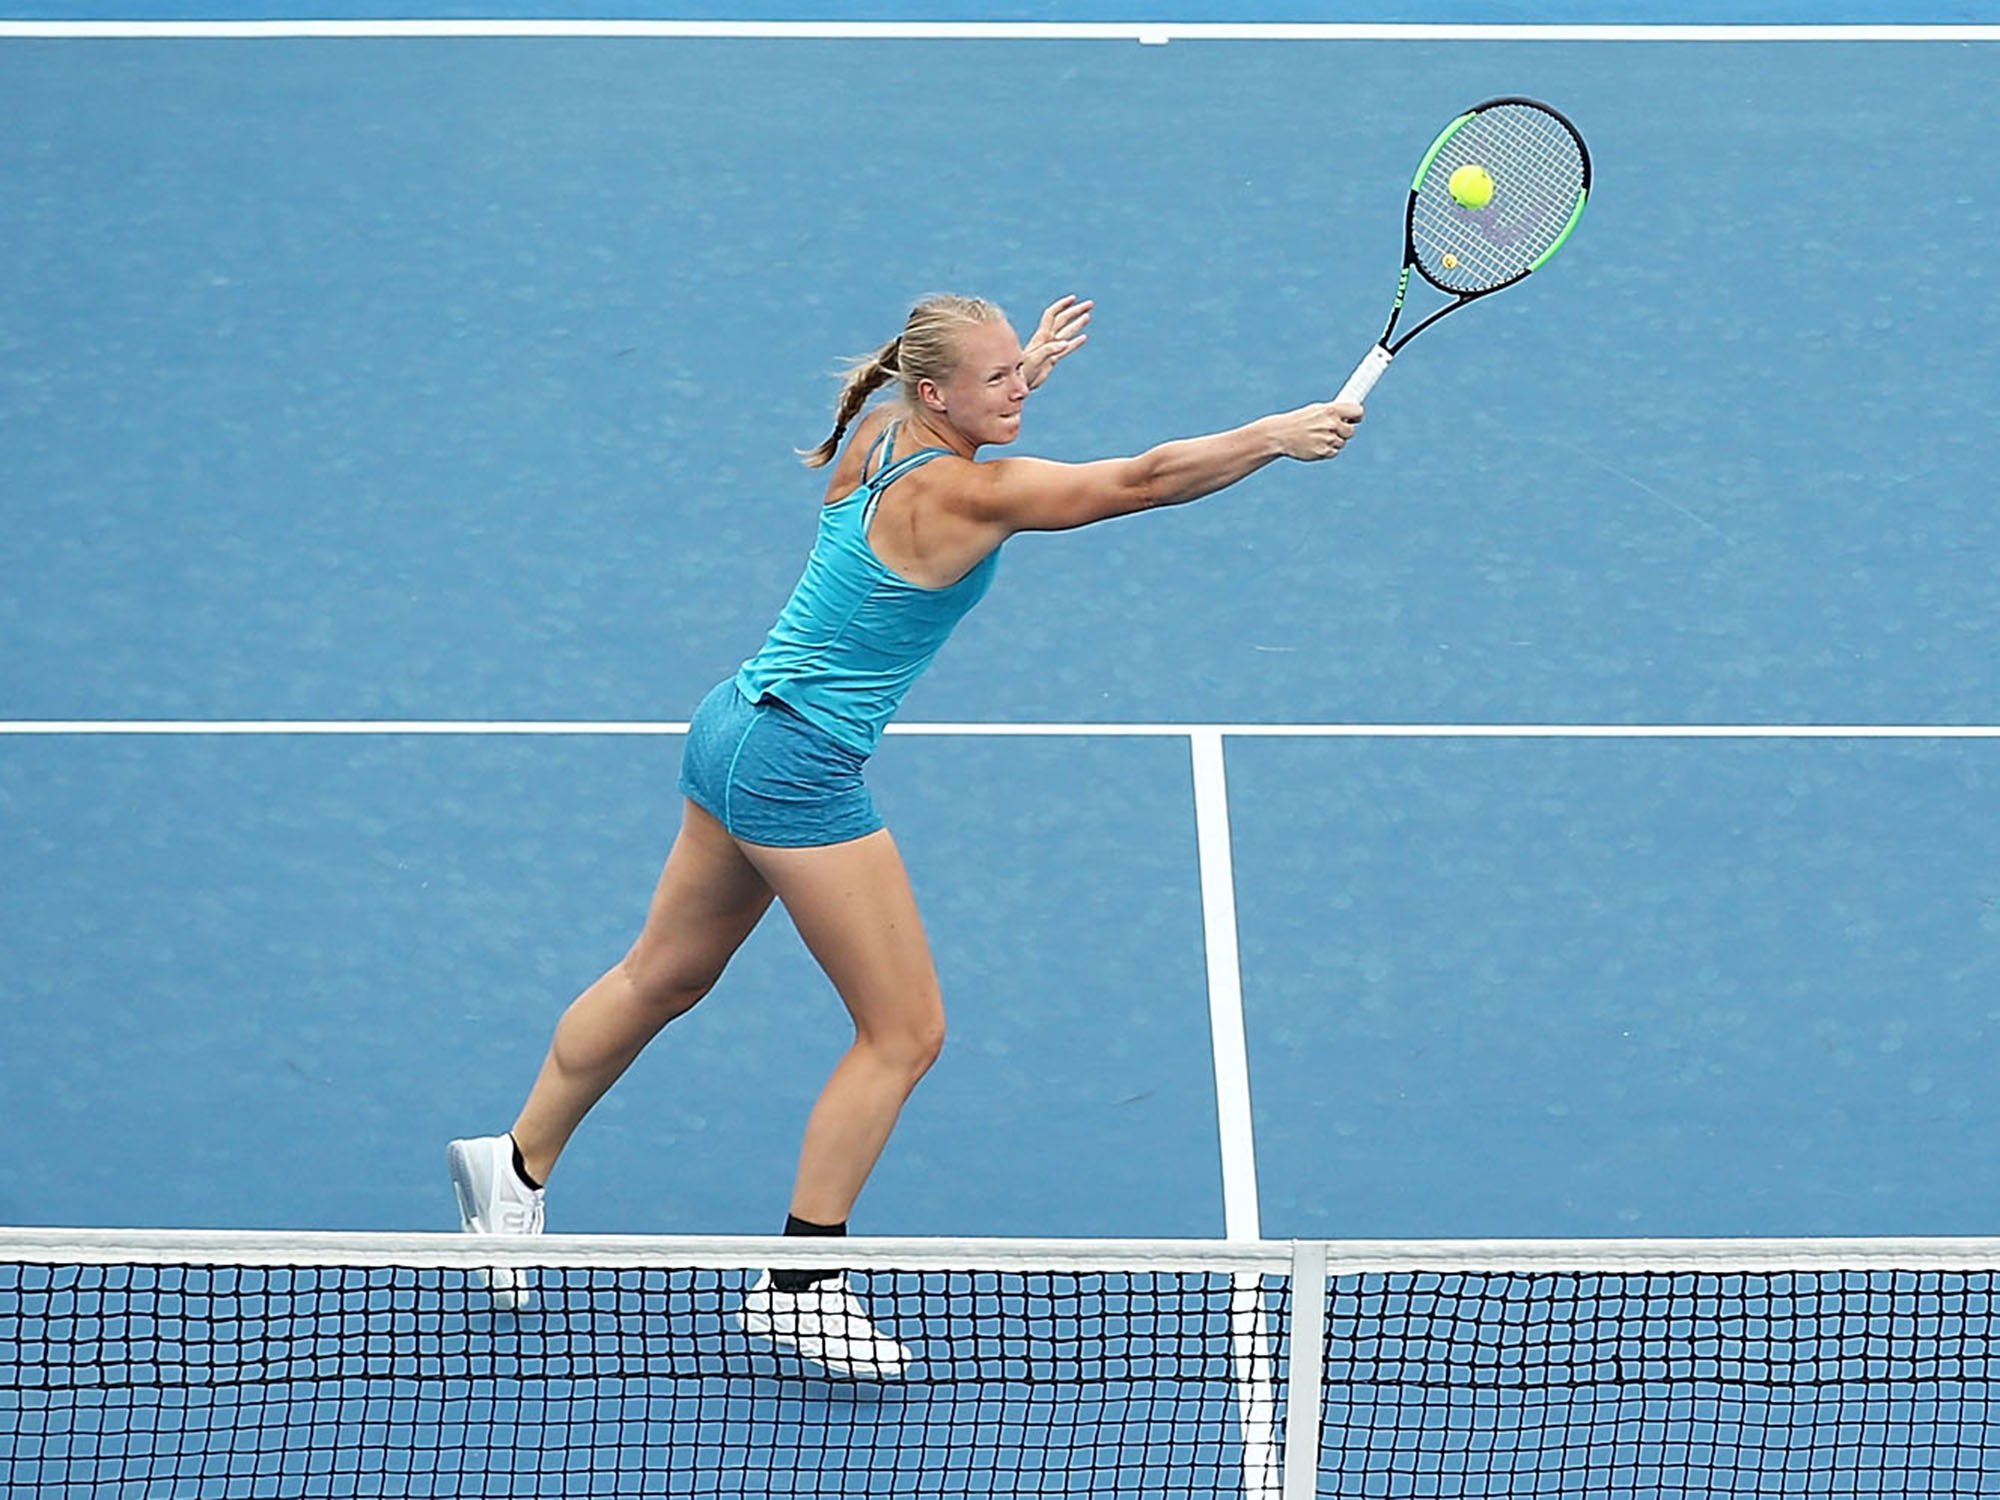 GOT THE TOUCH: Kiki Bertens volleys during a round one doubles match; Getty Images